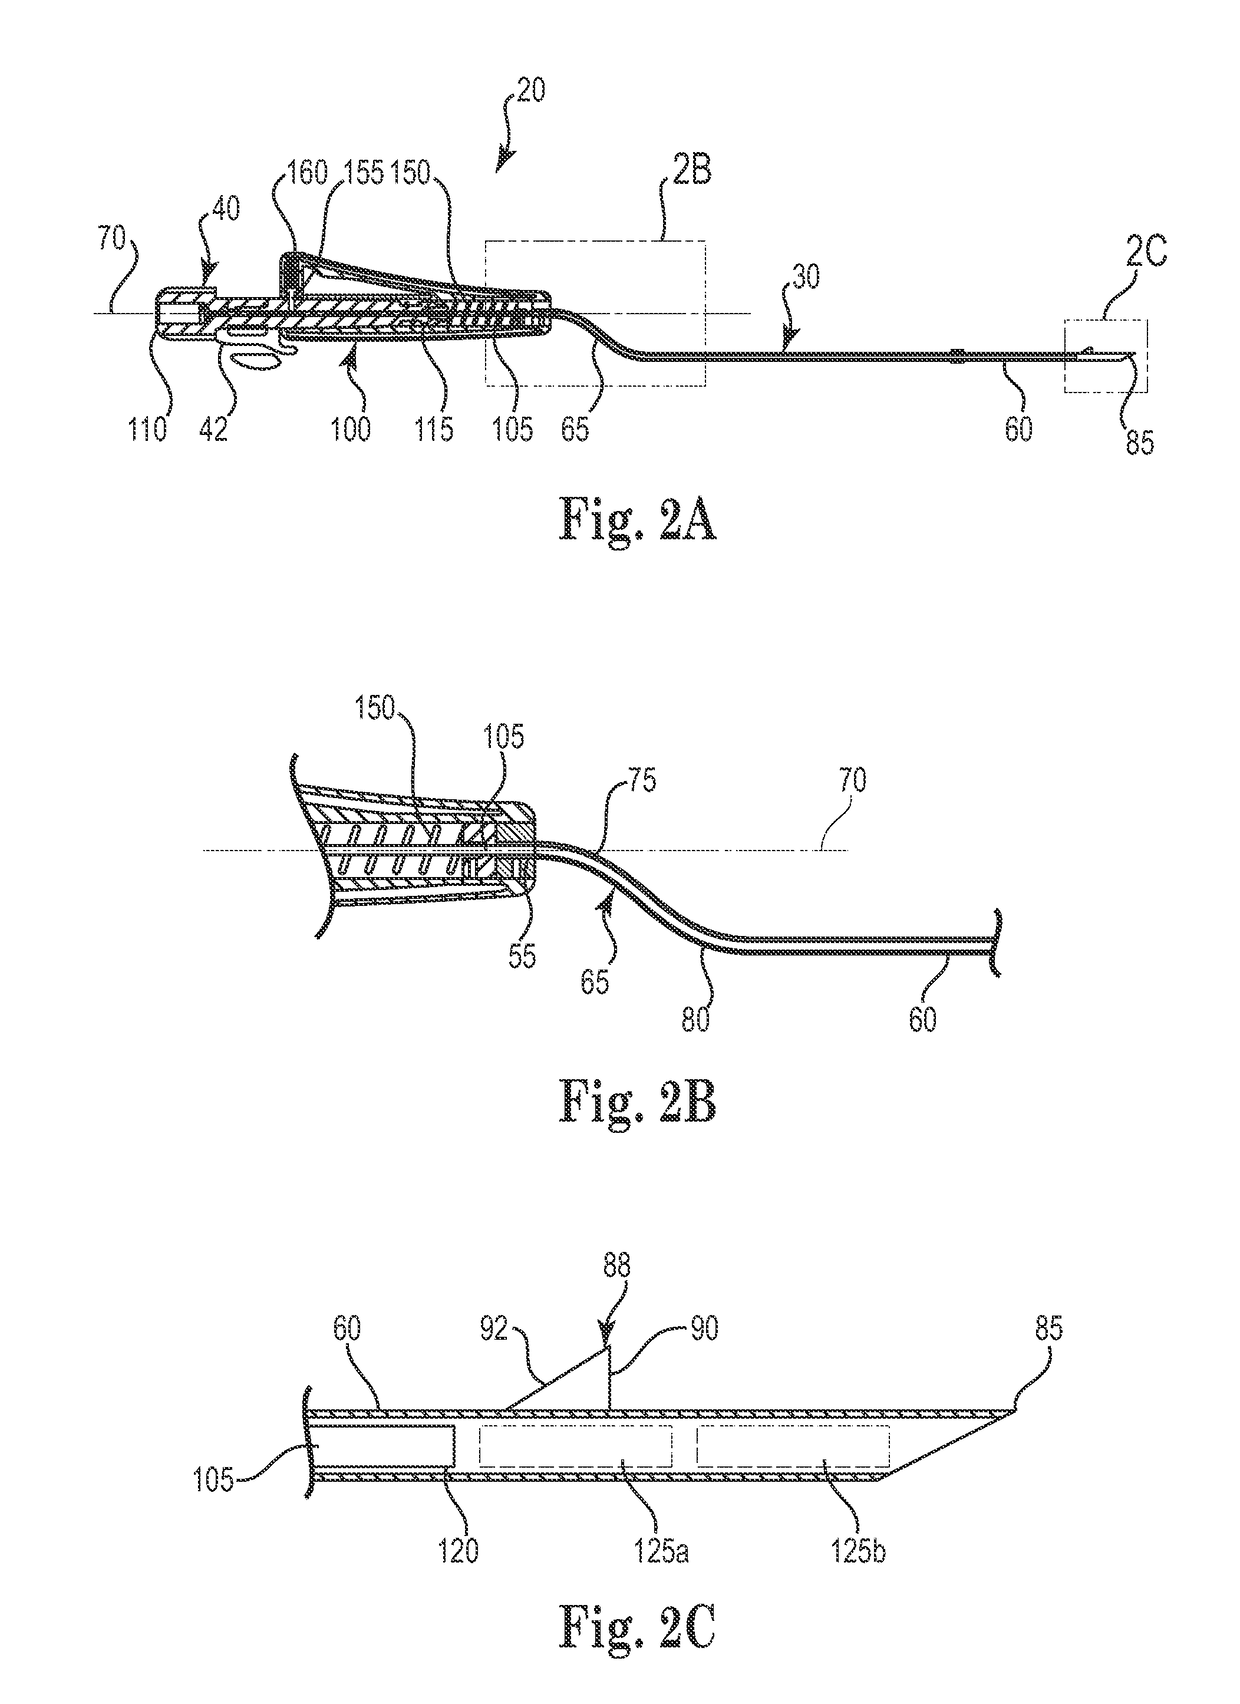 Intervertebral disc annulus repair system and bone anchor delivery tool